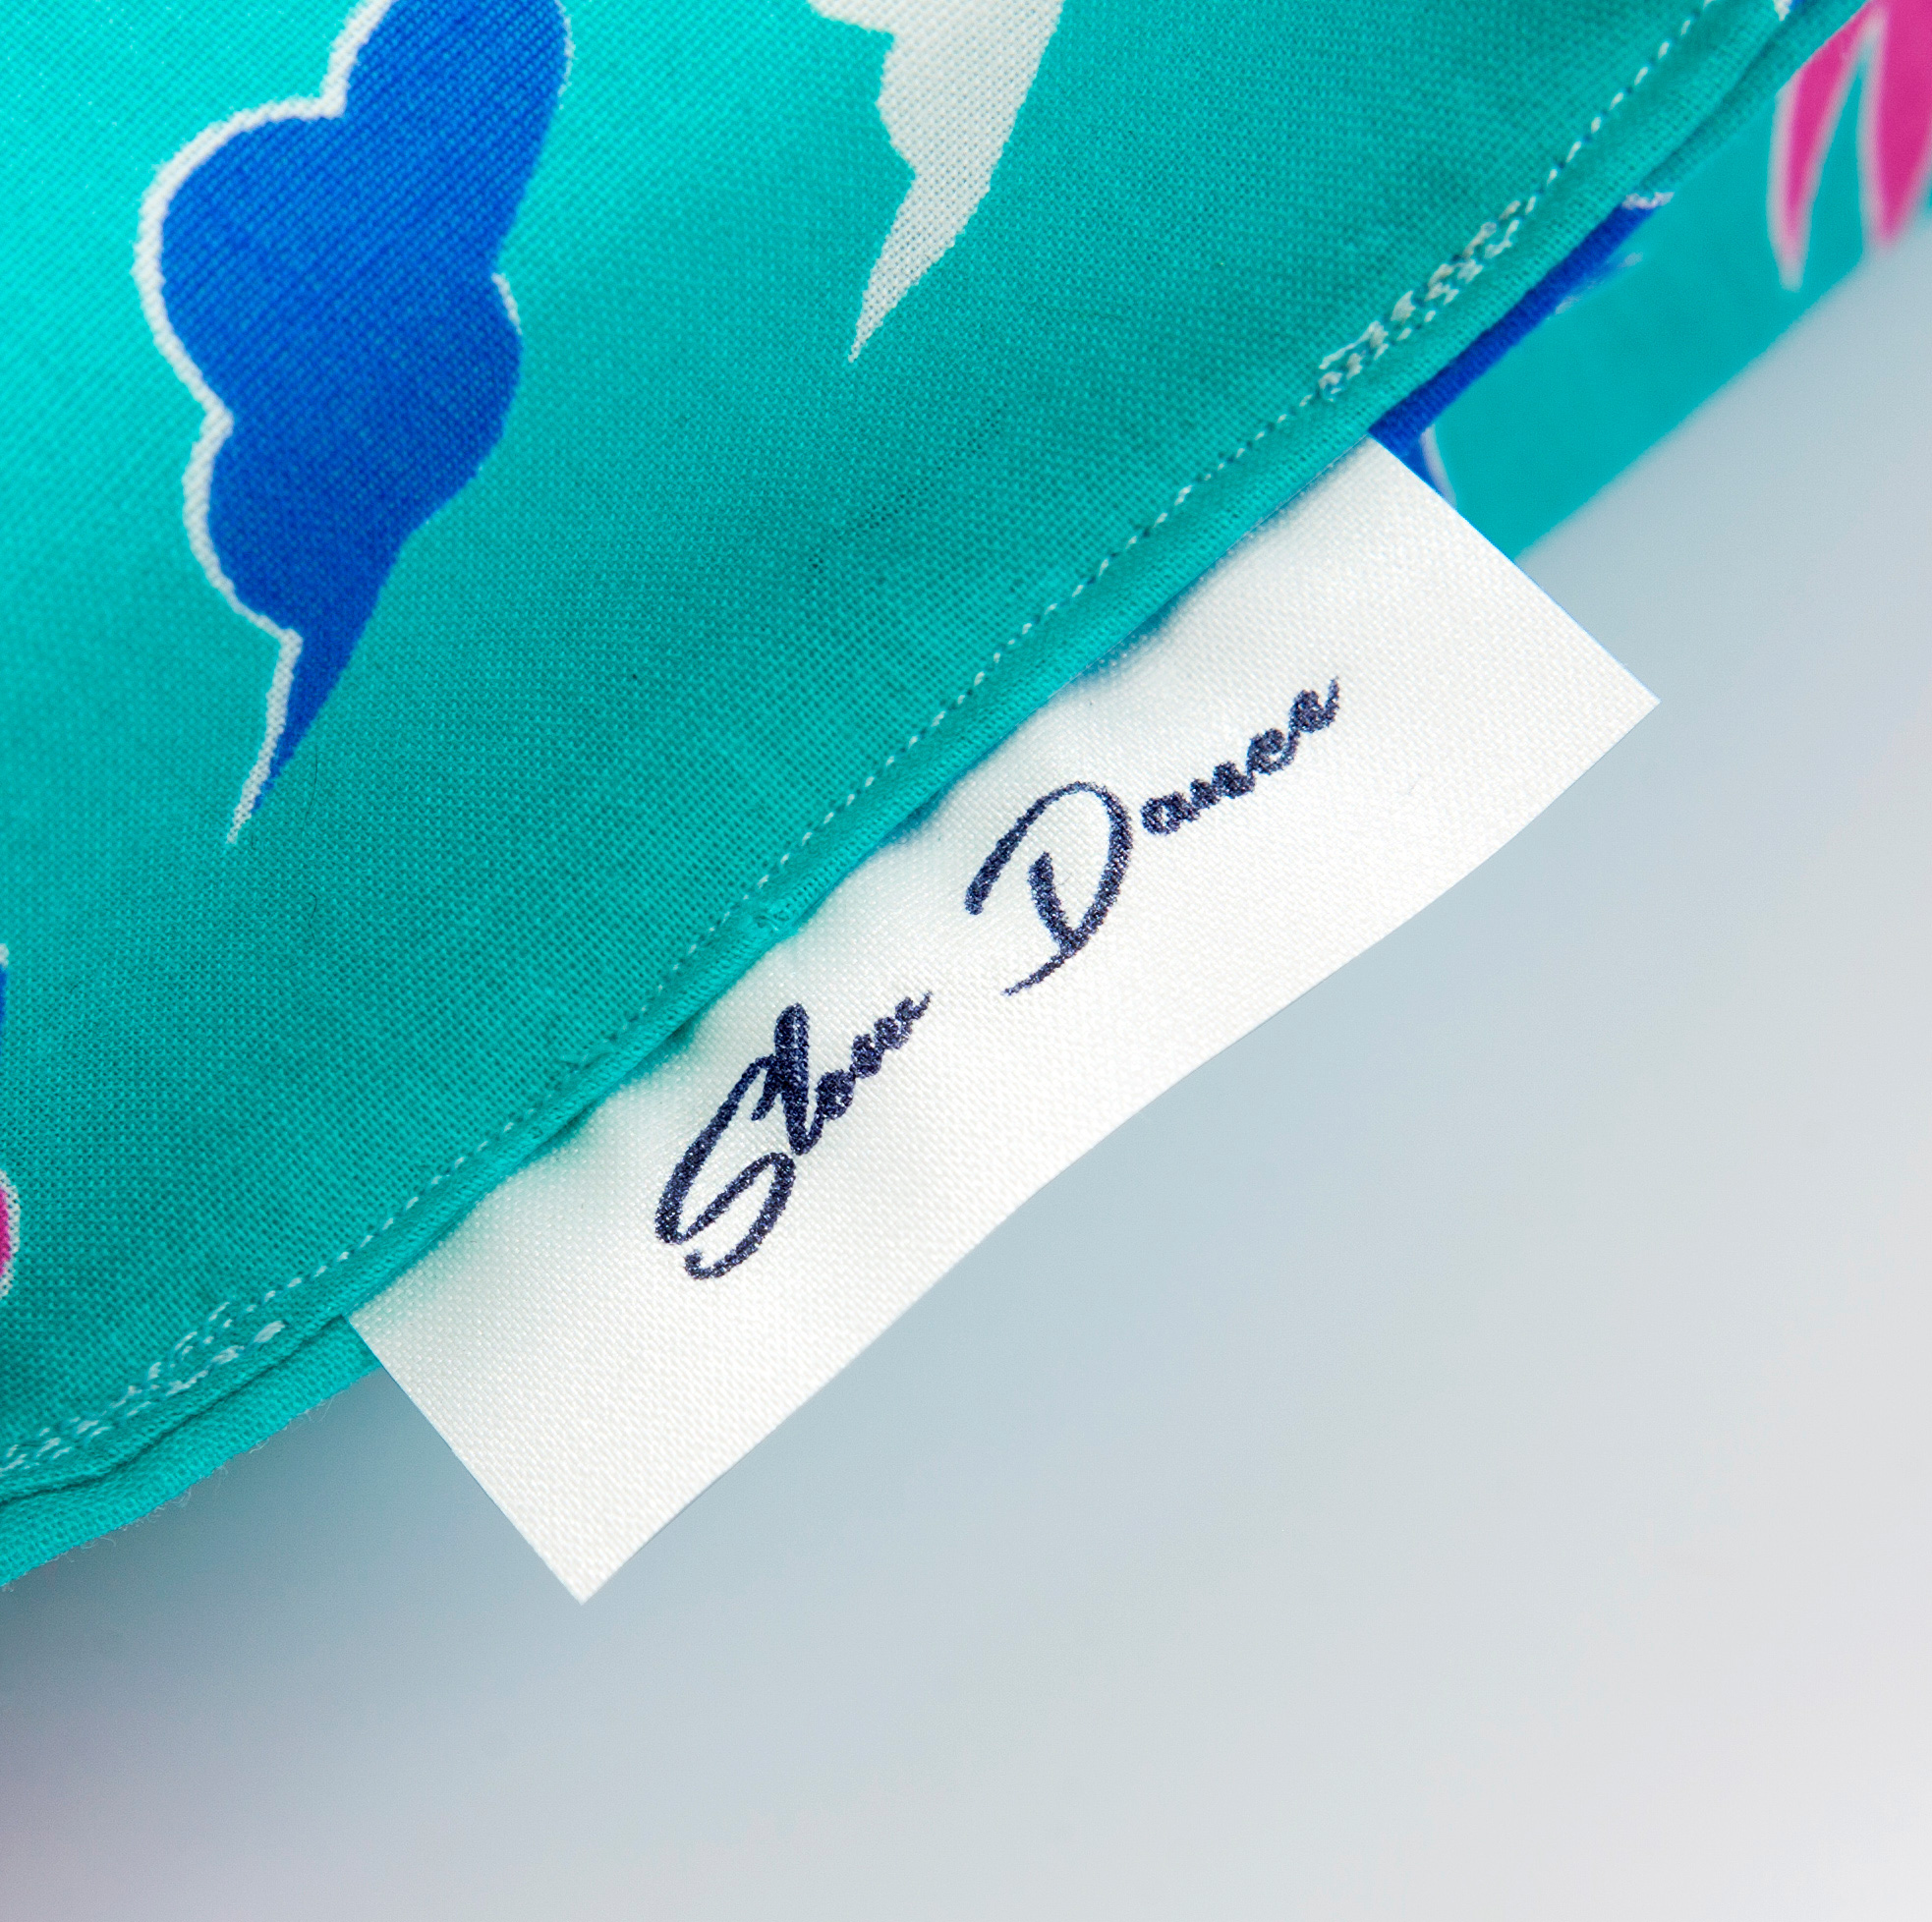 A close up image of a tag sewn into a teal life jacket